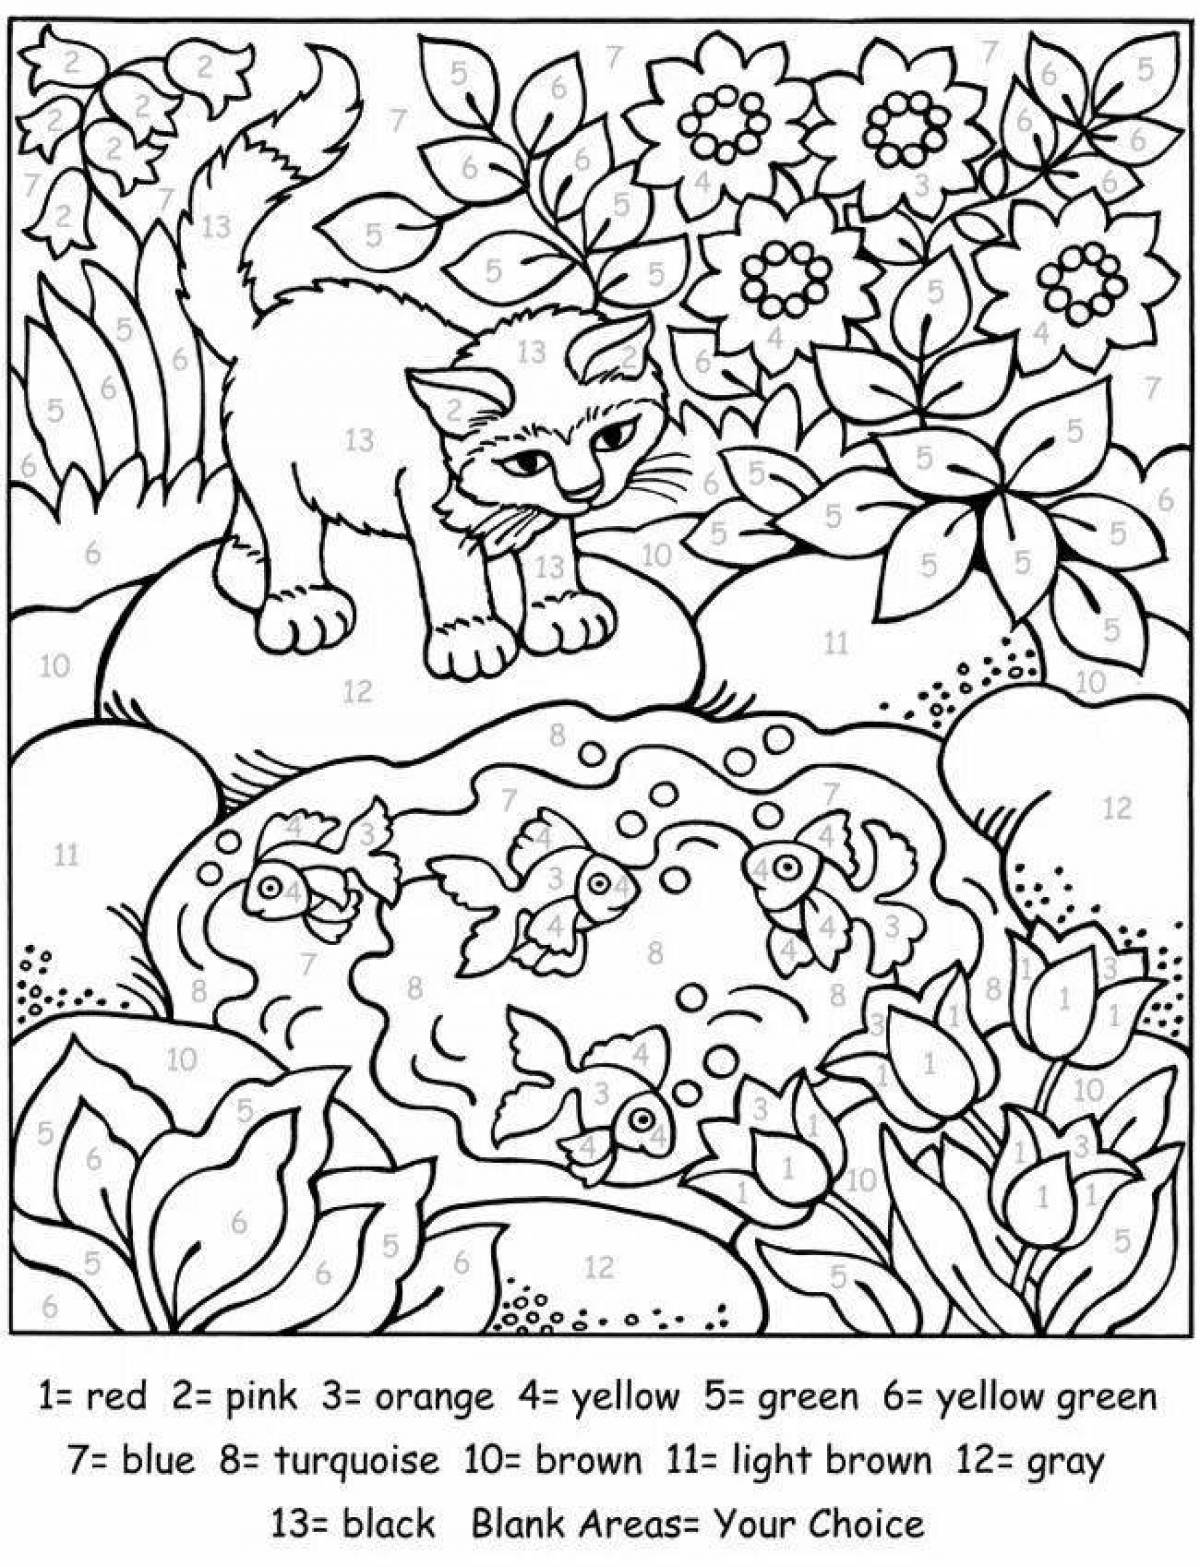 Funny cat coloring by numbers